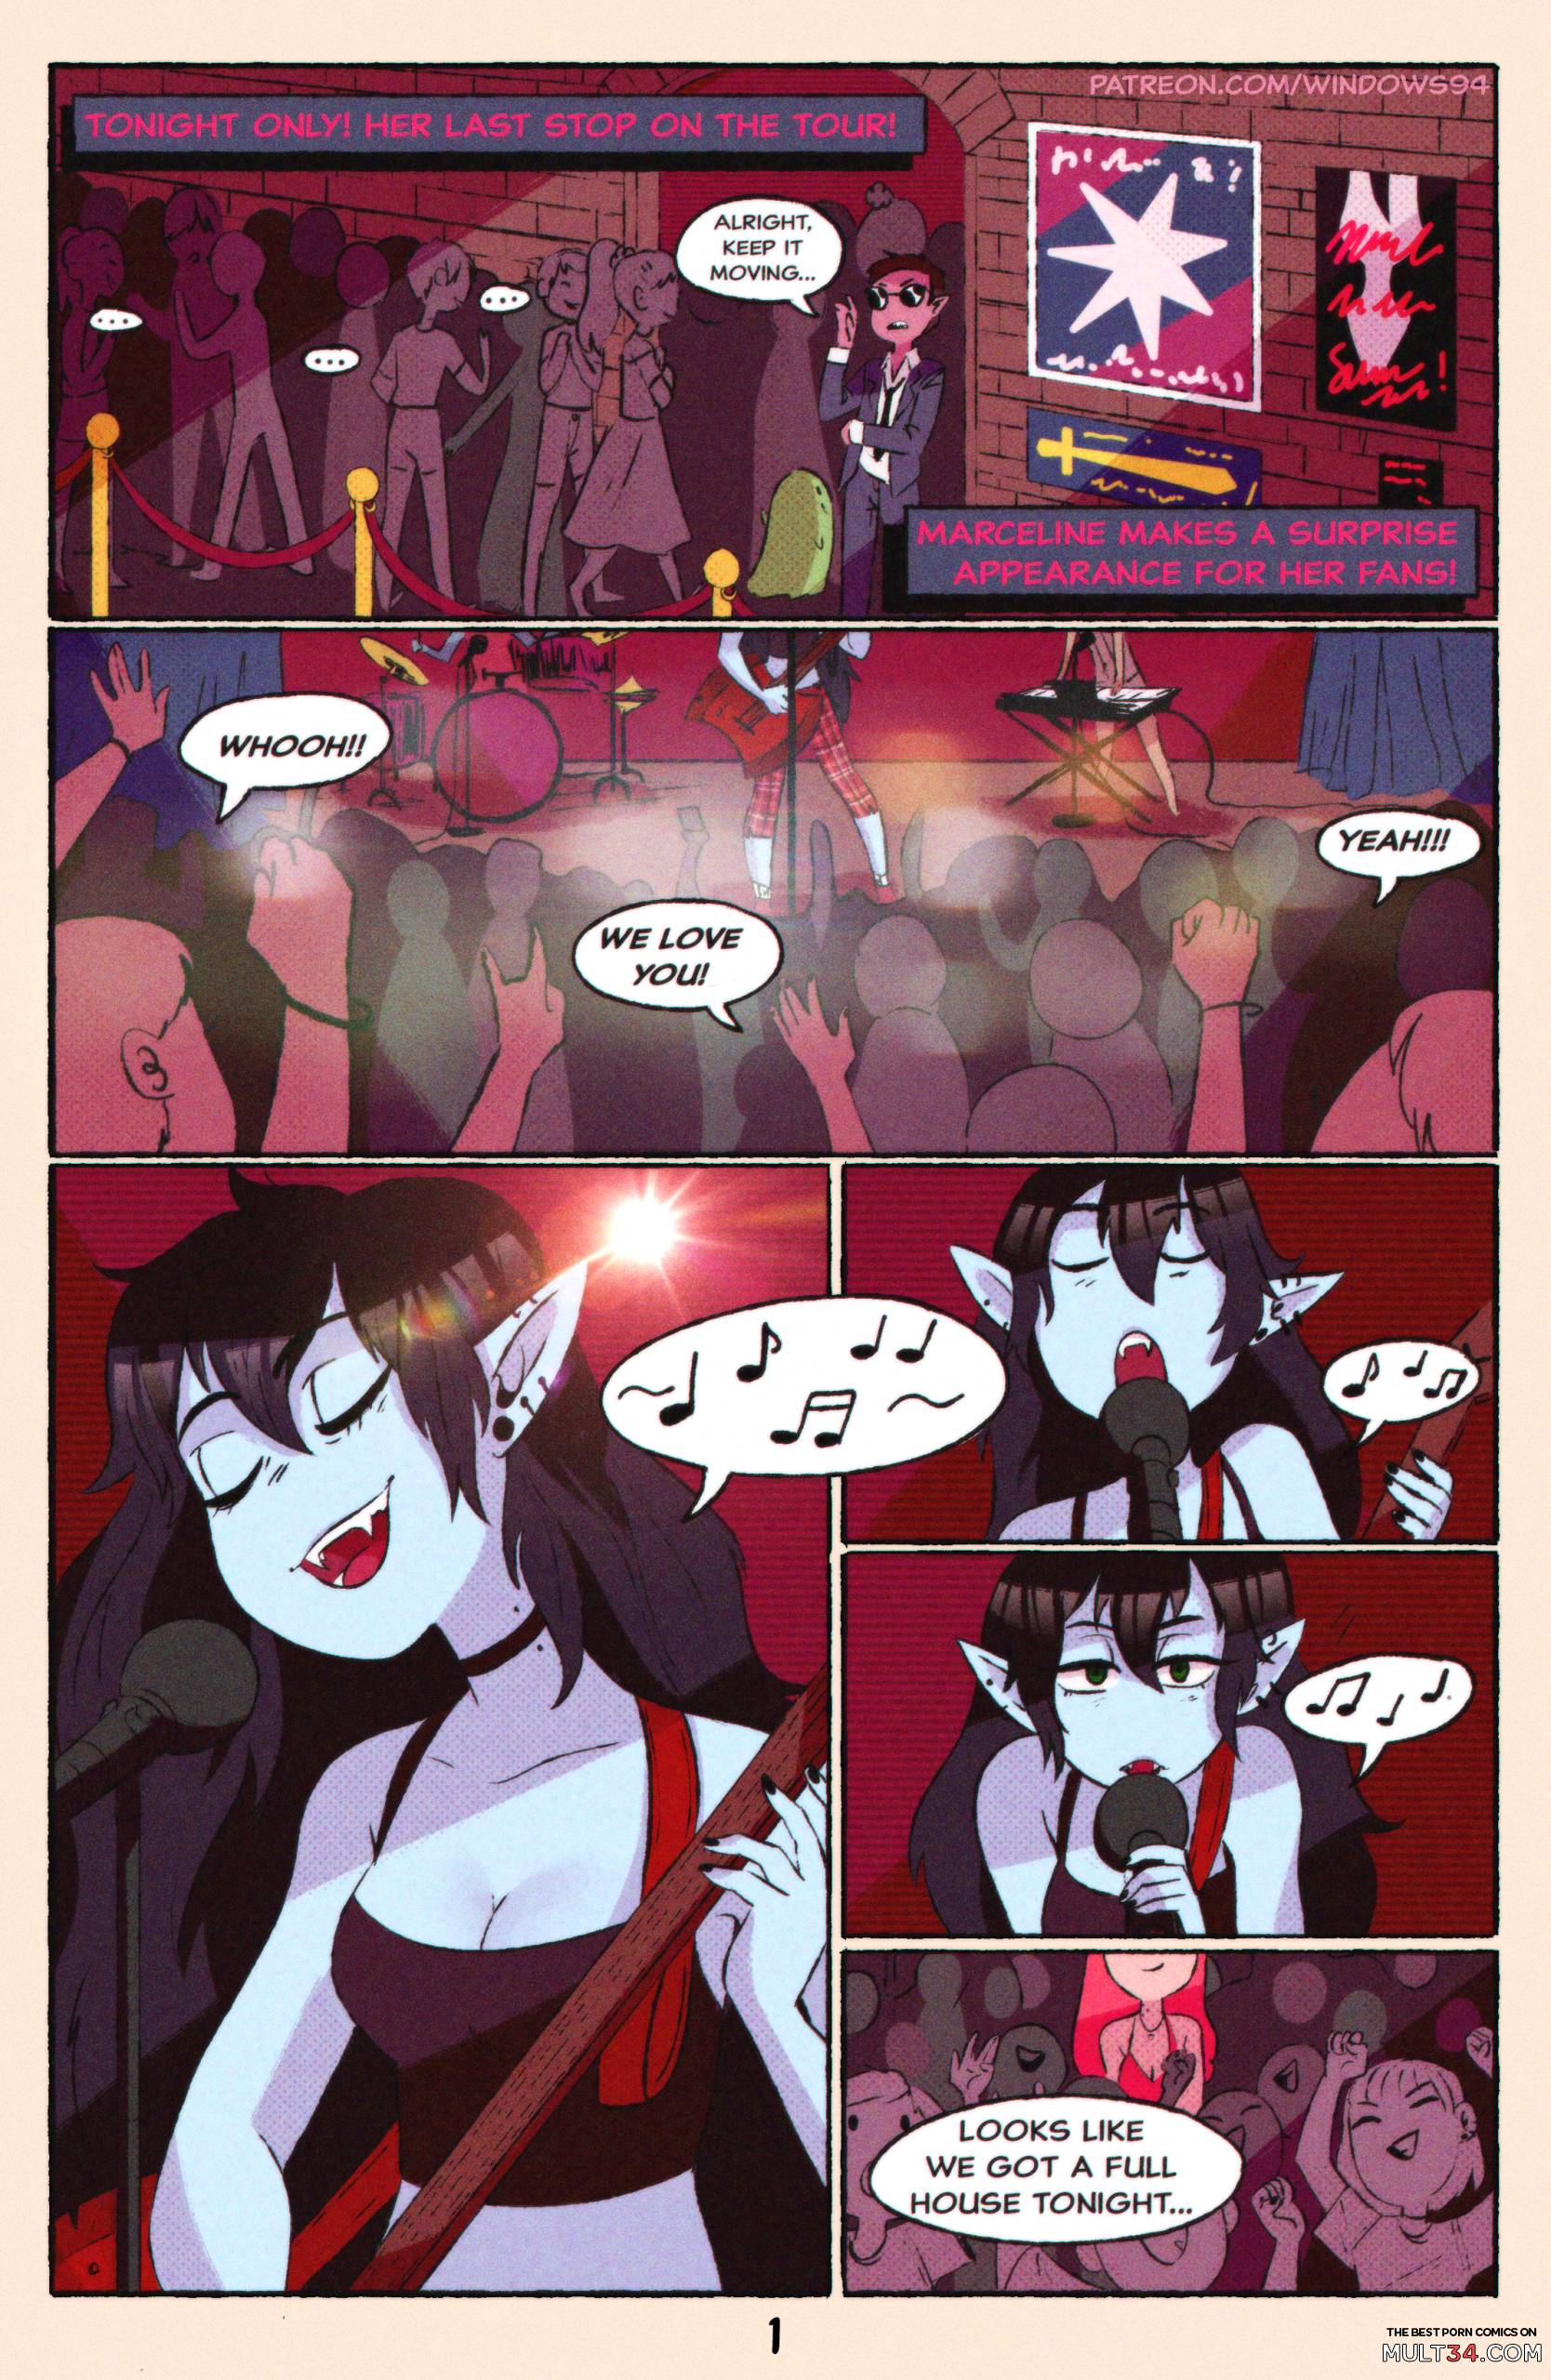 Sweet Payback page 2